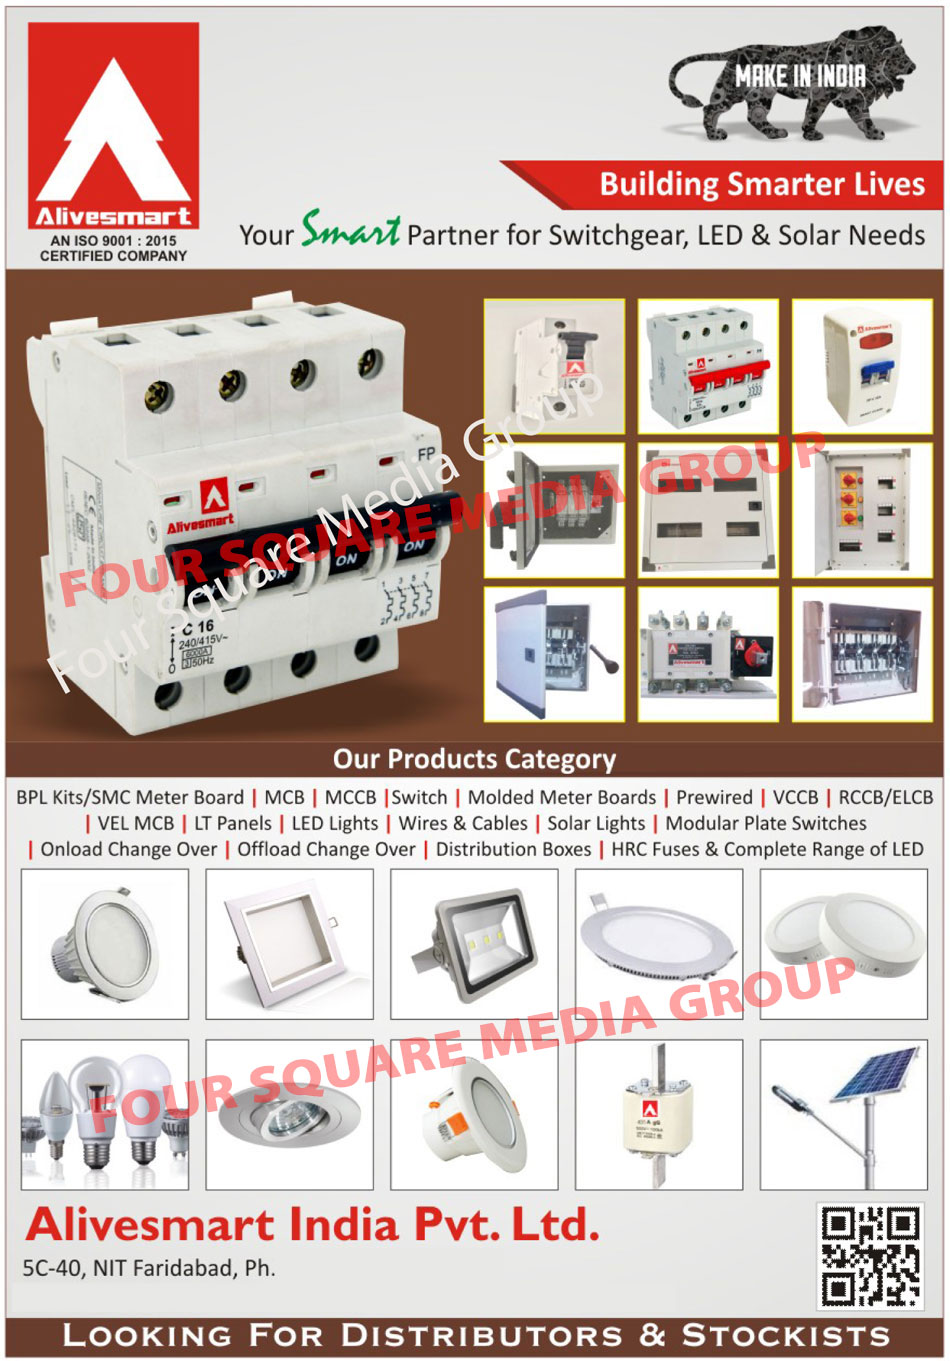 BPL Kits, SMC Meter Boards, MCB, MCCB, Switches, Molded Meter Boards, Prewired, VCCB, RCCB, ELCB, VEL MCB, LT Panels, Led Lights, Wires, Cables, Solar Lights, Modular Plate Switches, Onload Change Over, Distribution Boxes, HRC Fuses, Switchgears